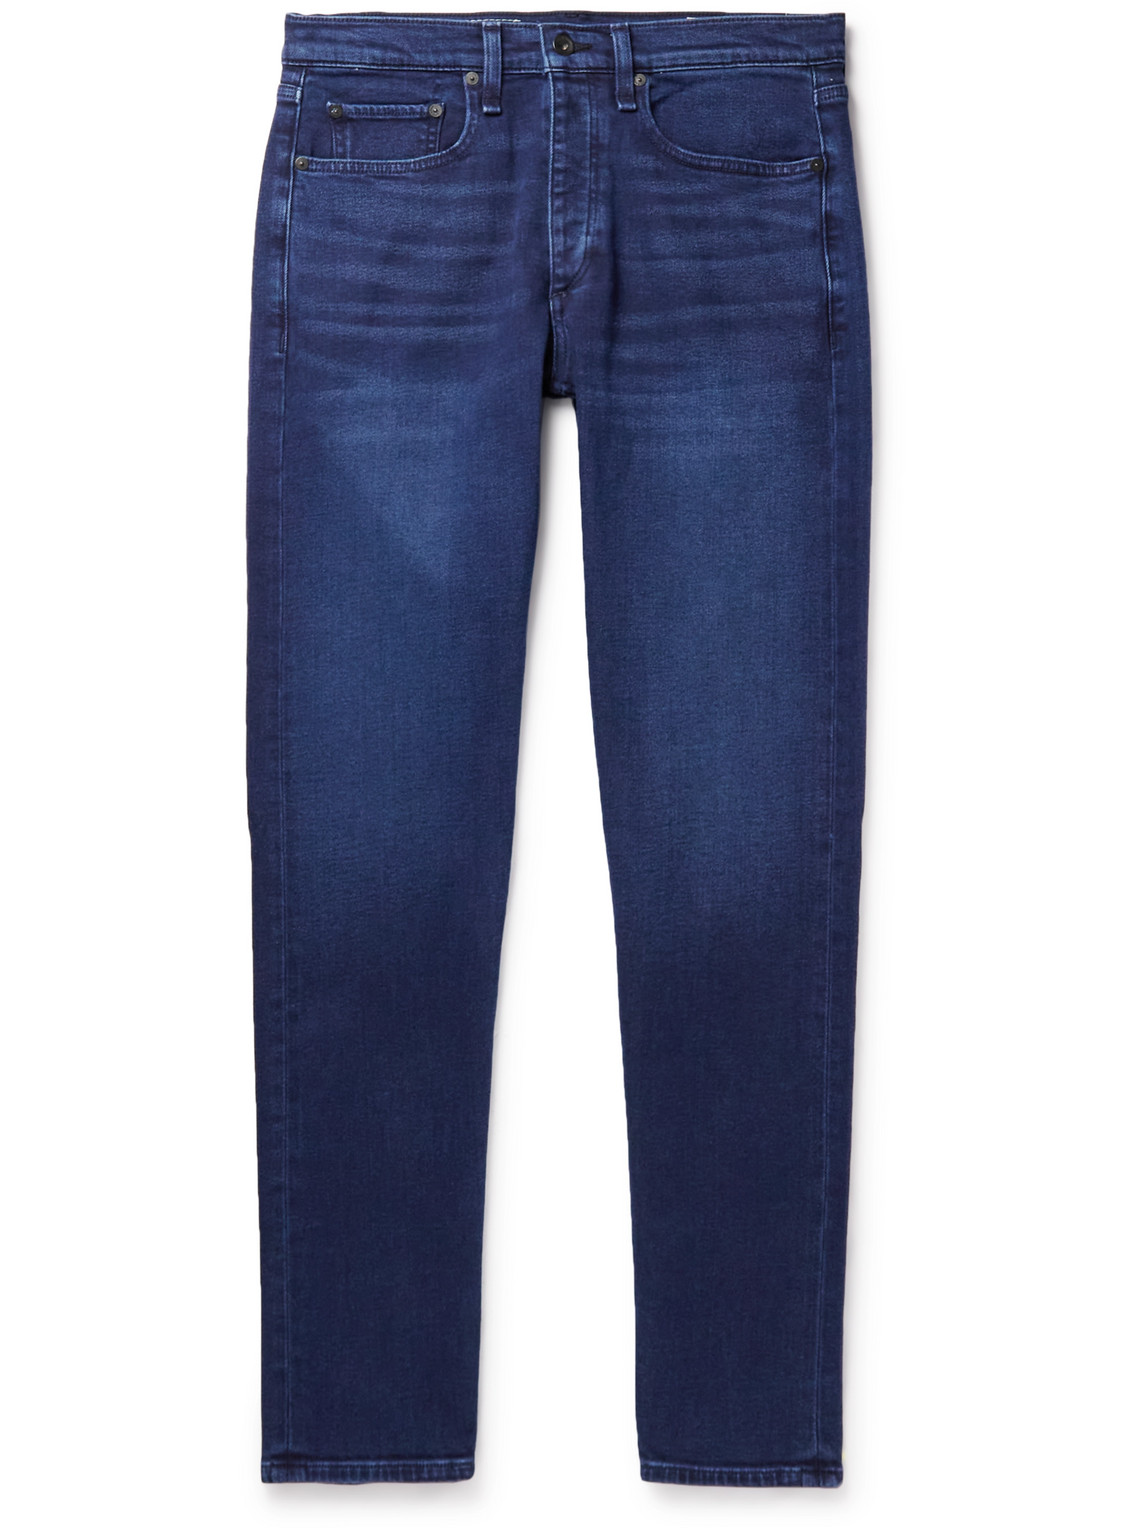 Fit 2 Slim-Fit Stretch-Cotton and Cashmere-Blend Jeans